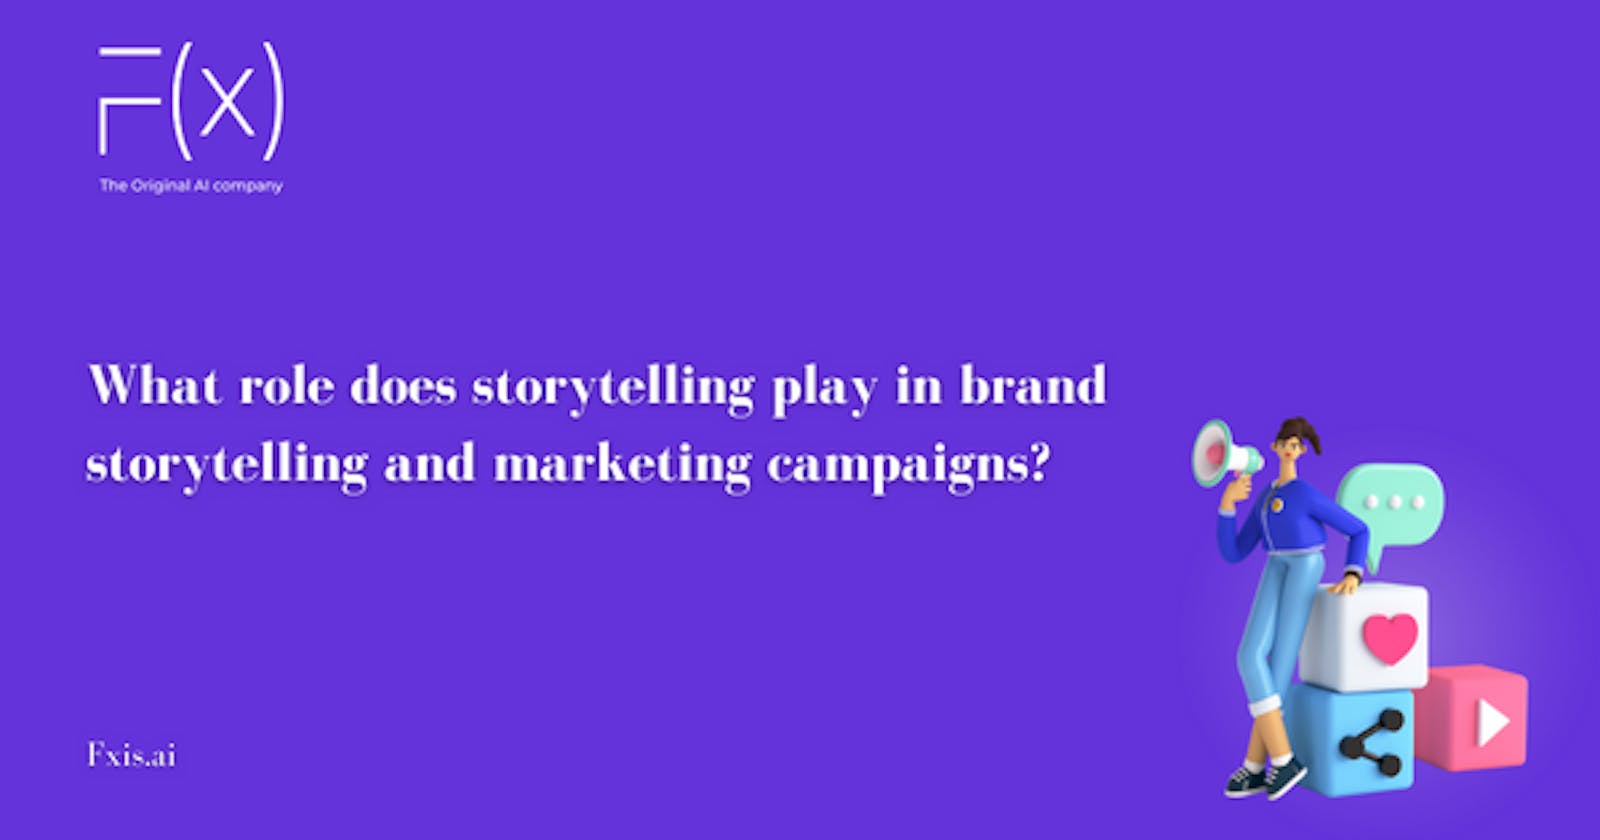 What role does storytelling play in brand storytelling and marketing campaigns?